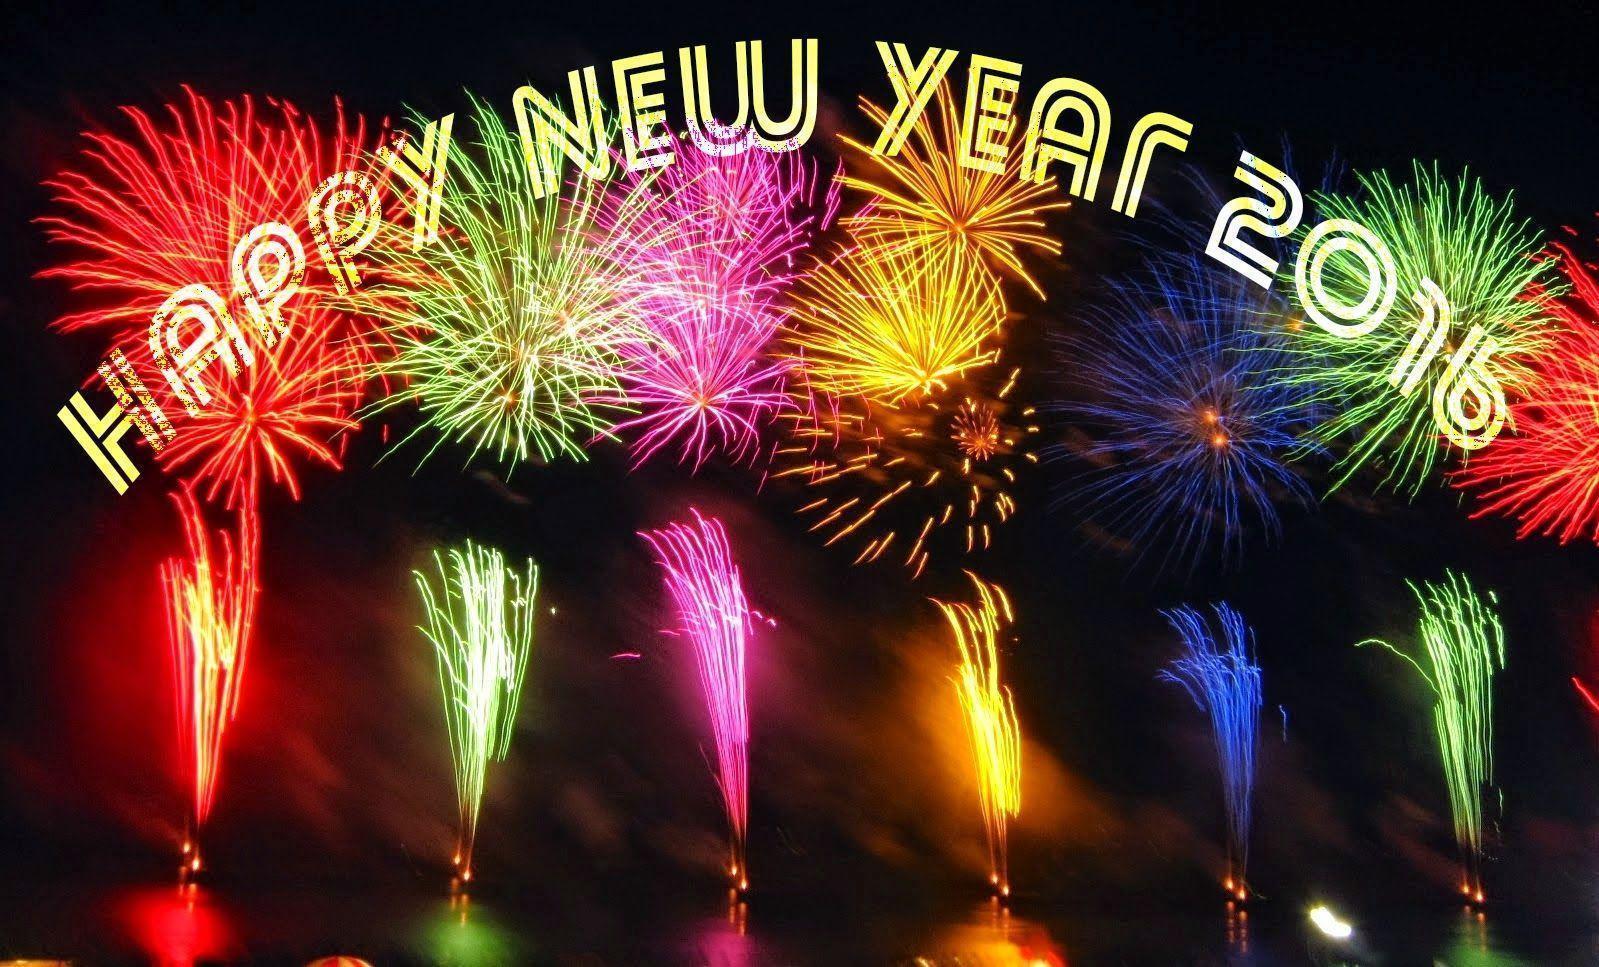 Happy New Year 2017 Image, Wallpaper, Picture, Photo in HD Free